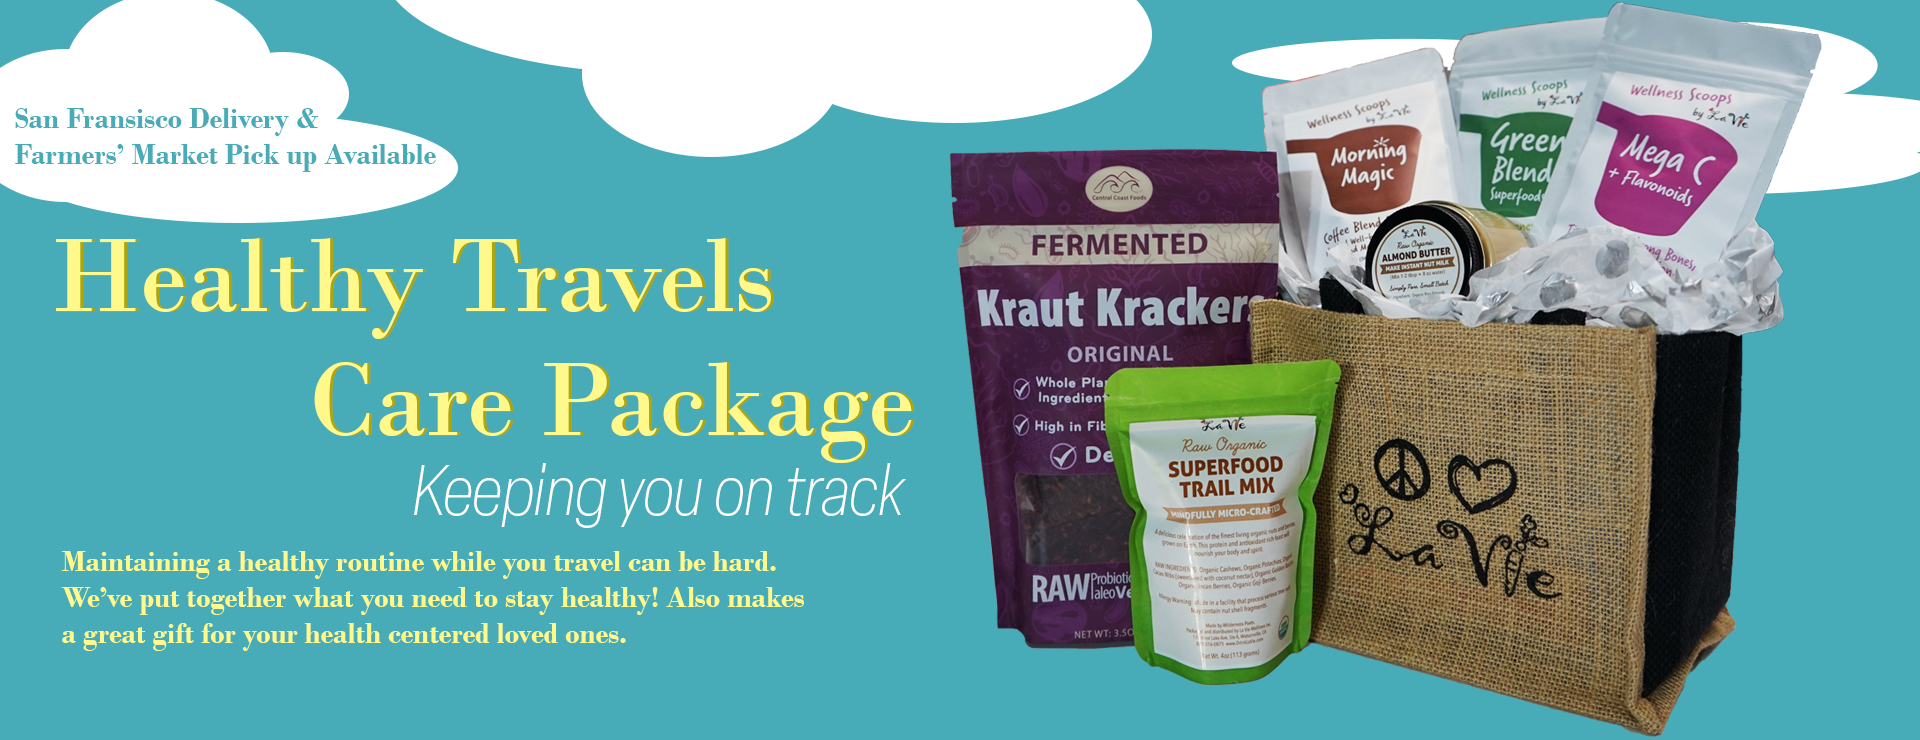 Healthy travels care package. Keeping you on track. Maintaining a healthy routine while you travel can be hard. We’ve put together what you need to stay healthy! Also makes a great gift for your health centered loved ones. San Francisco Delivery & Farmer's Market pick up available